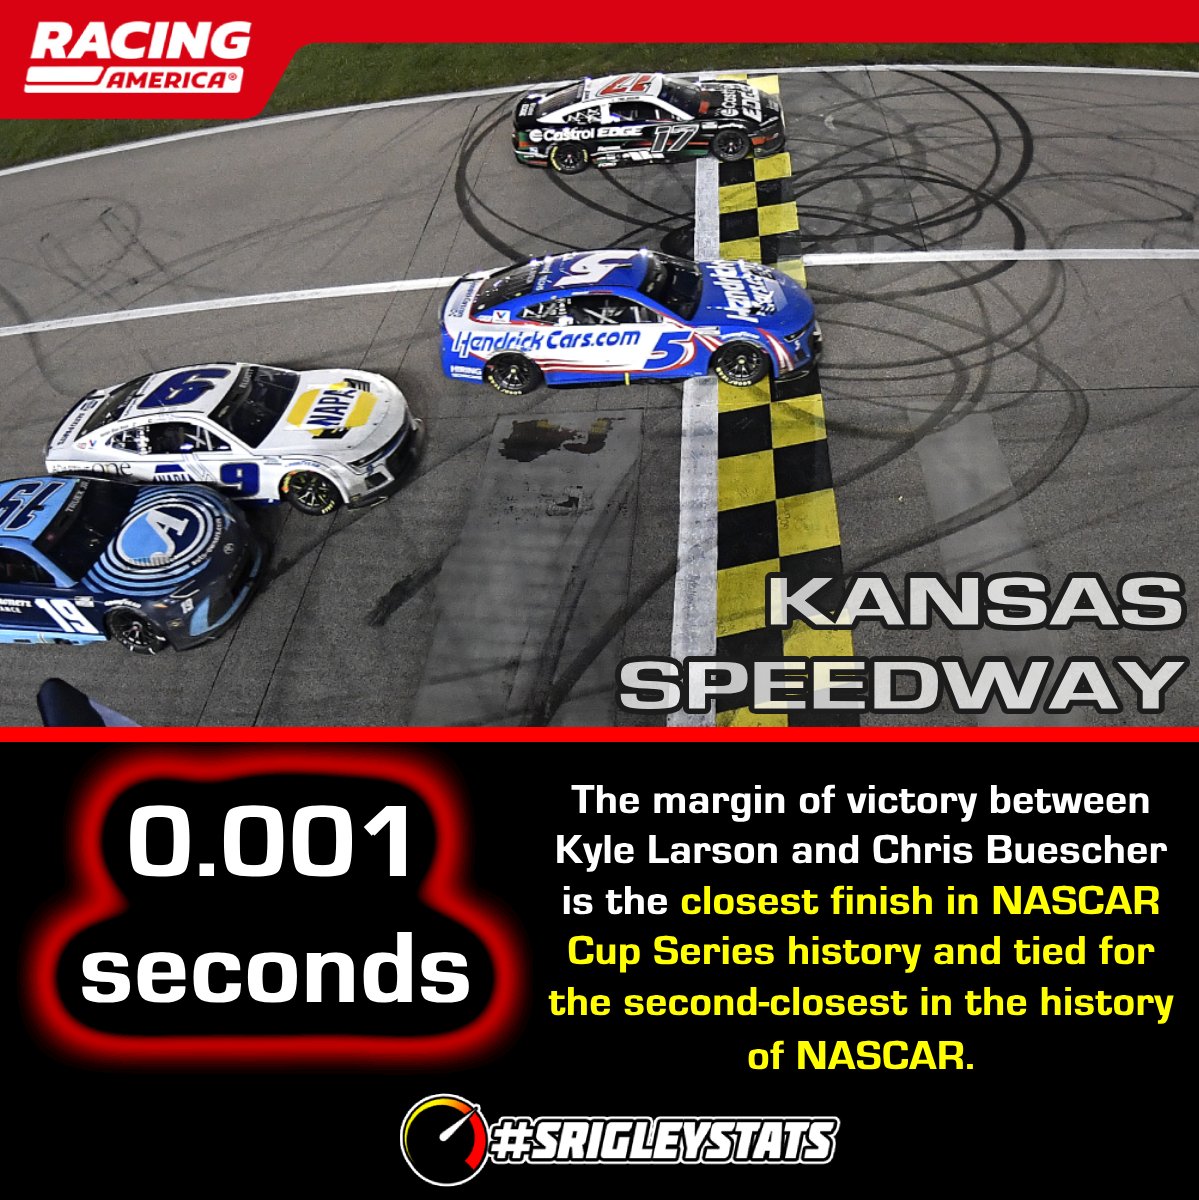 In Sunday's #AdventHealth400 at Kansas, Kyle Larson beat Chris Buescher to the line by 0.001 seconds -- the closest finish in NASCAR Cup Series history and the second-closest in #NASCAR history. #SrigleyStats feat. @RacingAmerica